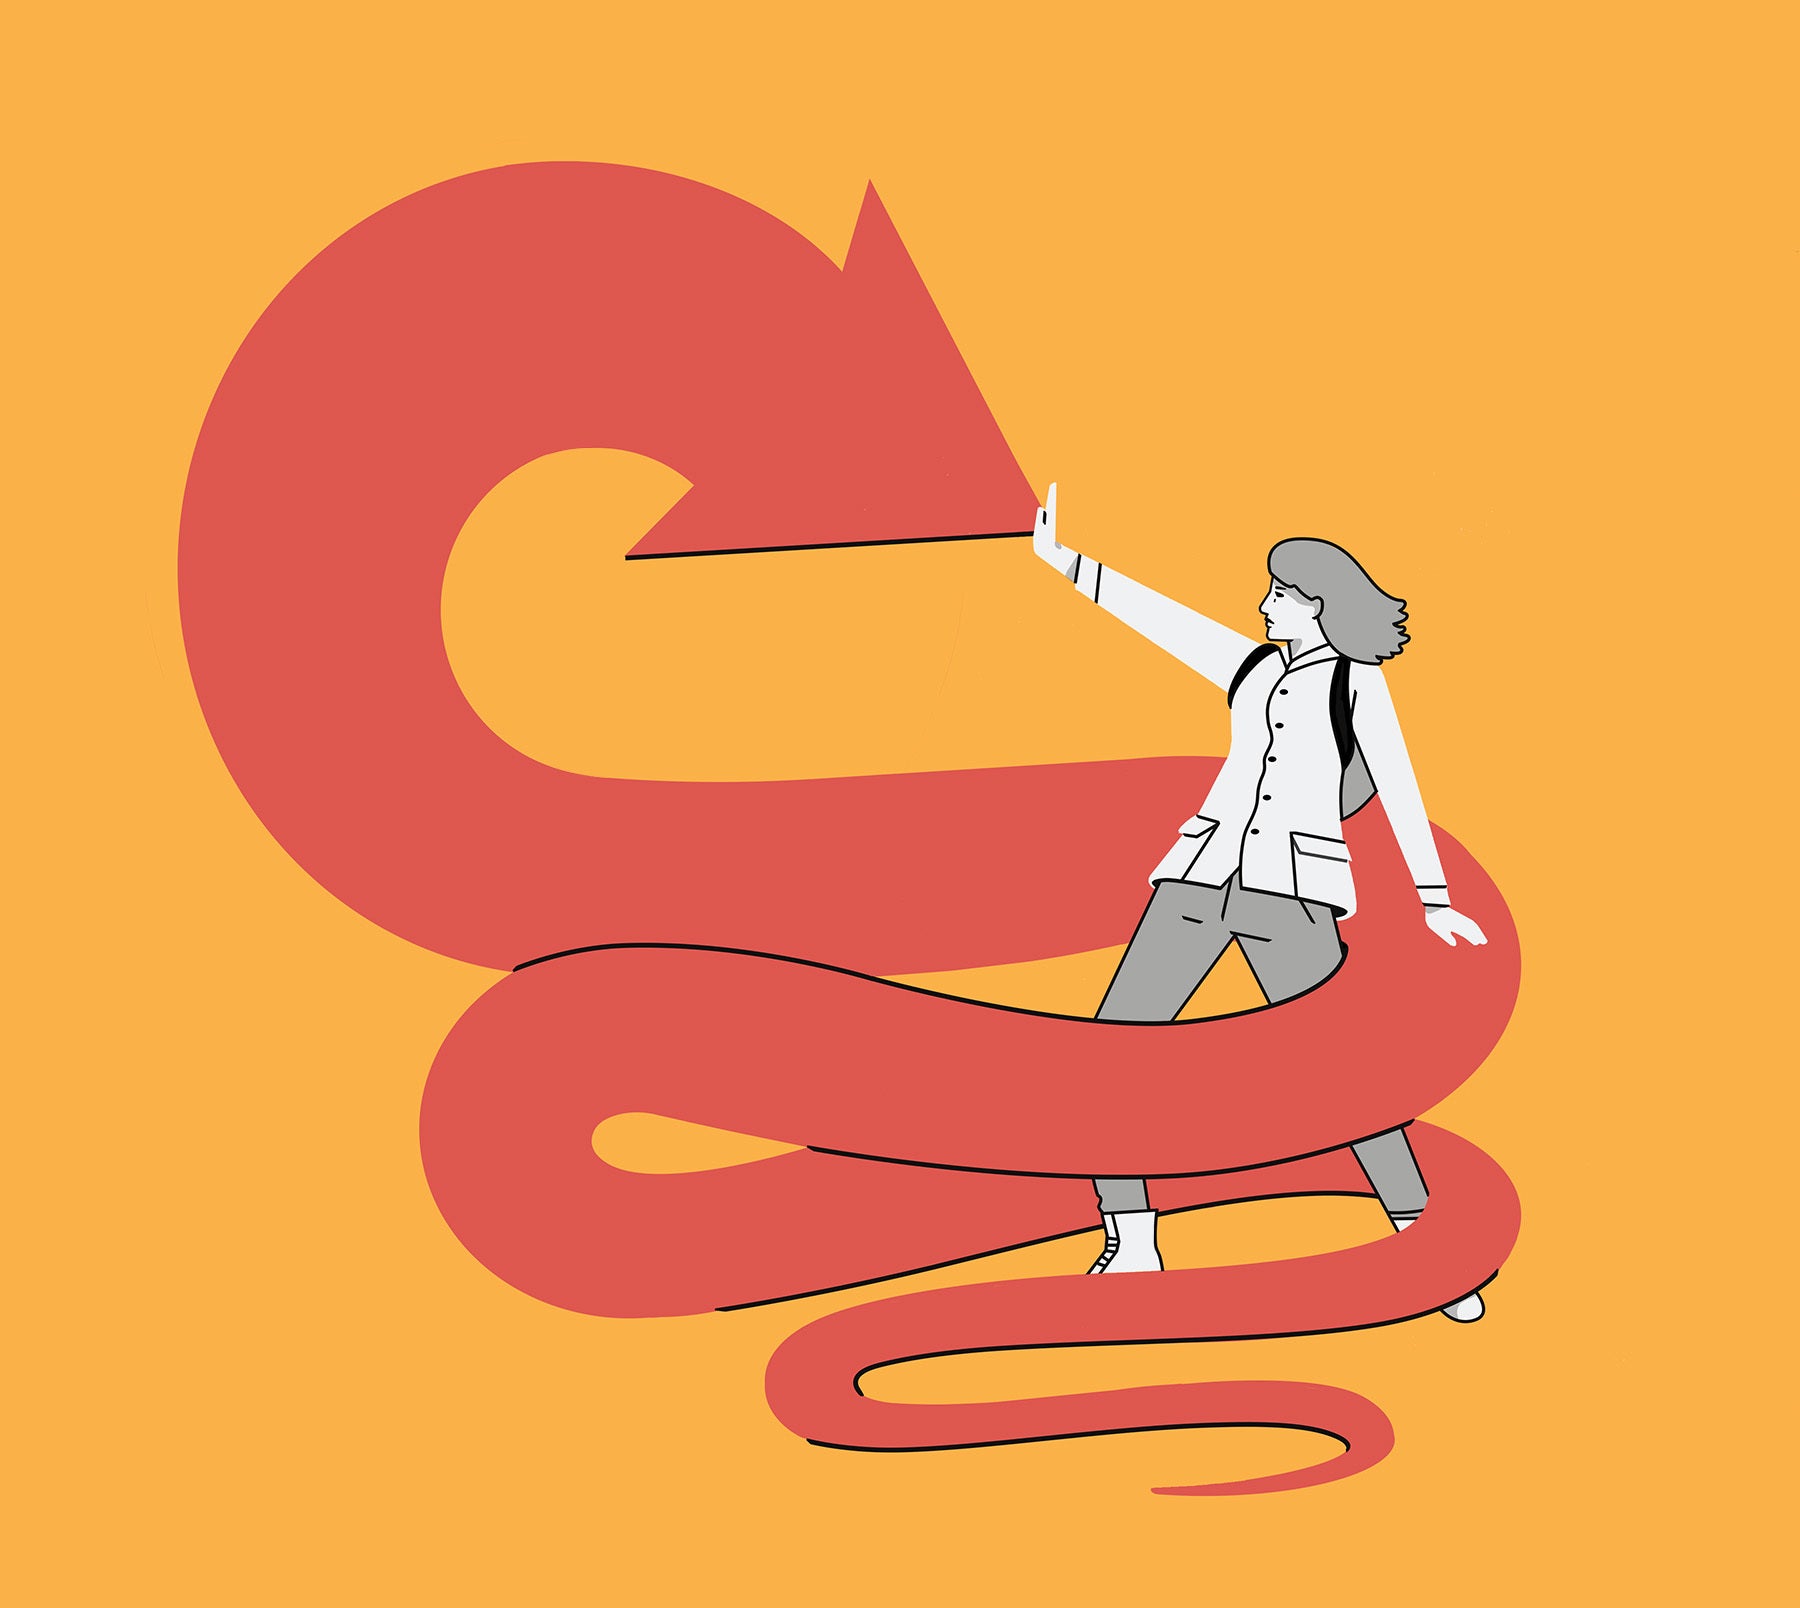 Illustration of a person standing at the center of a winding red arrow, stopping its motion with their hand